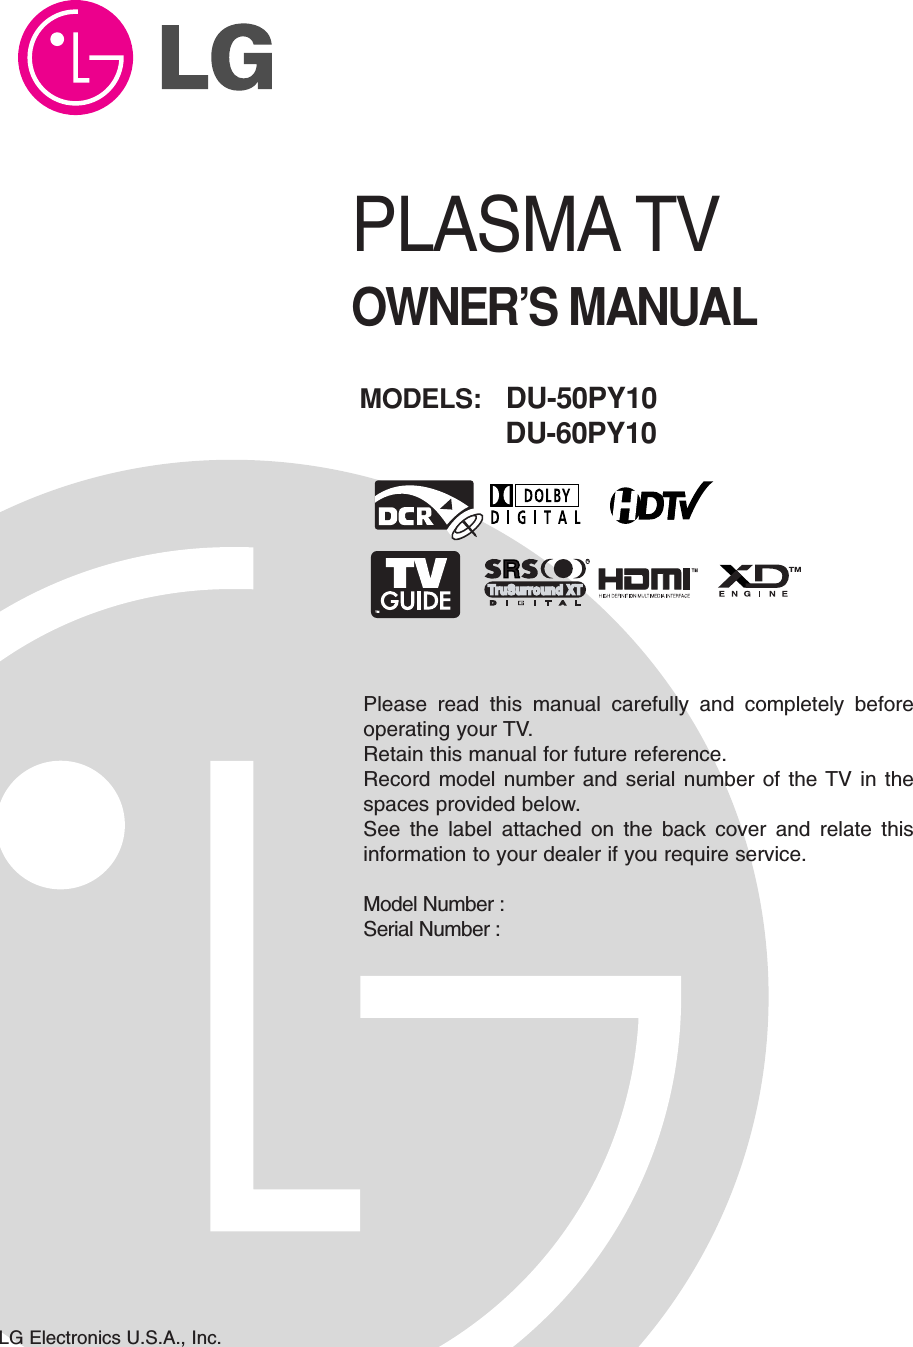 Please read this manual carefully and completely beforeoperating your TV. Retain this manual for future reference.Record model number and serial number of the TV in thespaces provided below. See the label attached on the back cover and relate thisinformation to your dealer if you require service.Model Number : Serial Number : MODELS: DU-50PY10DU-60PY10LG Electronics U.S.A., Inc.TMRTruSurround XTPLASMA TVOWNER’S MANUAL